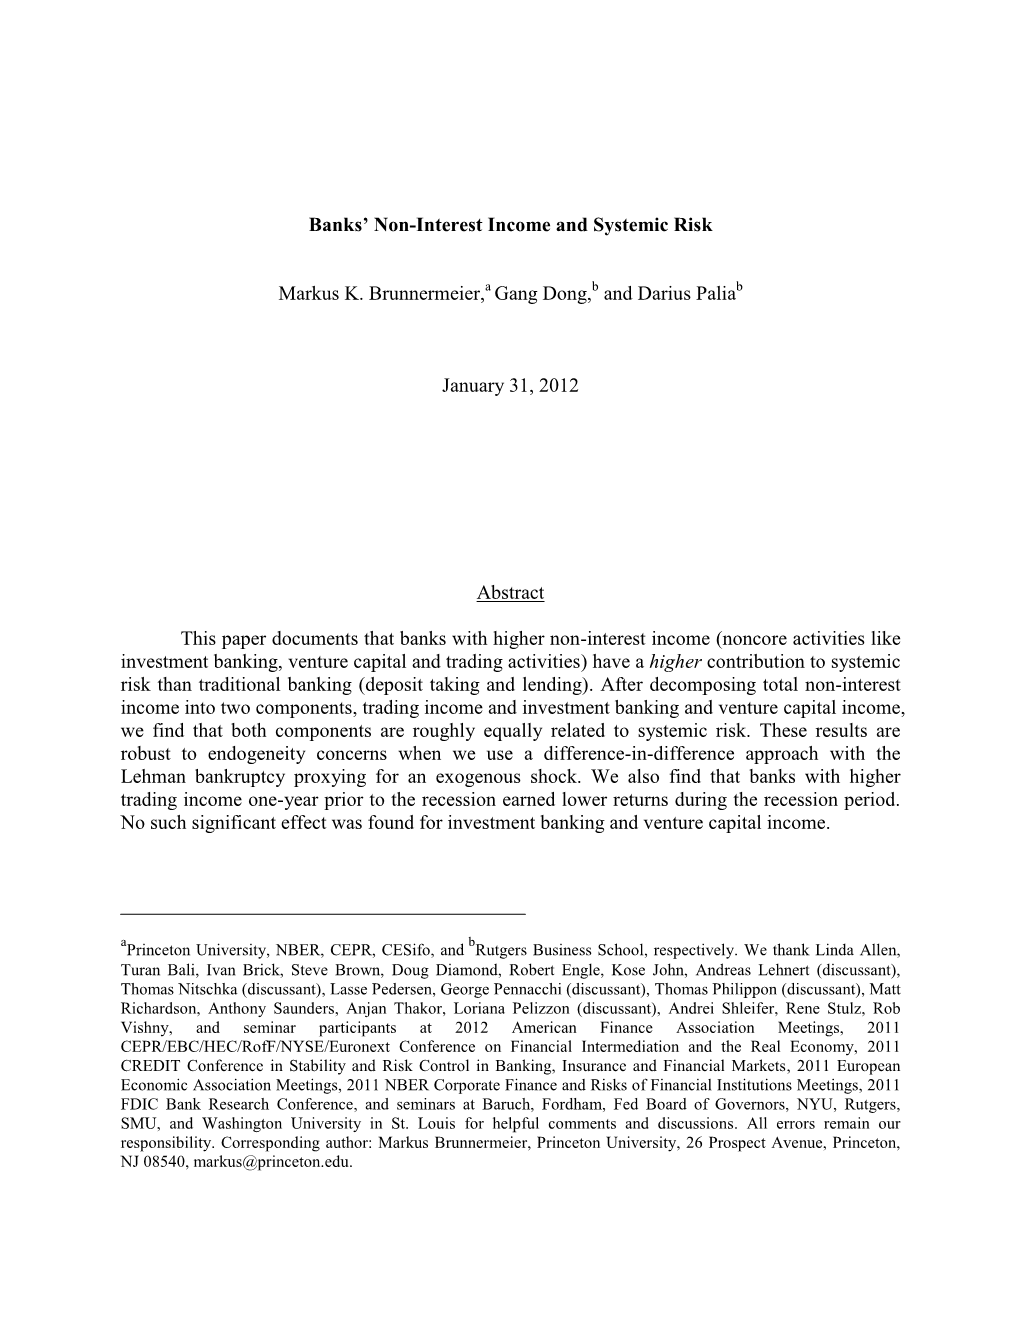 Banks' Non-Interest Income and Systemic Risk Markus K. Brunnermeier, Gang Dong, and Darius Palia January 31, 2012 Abstract Th